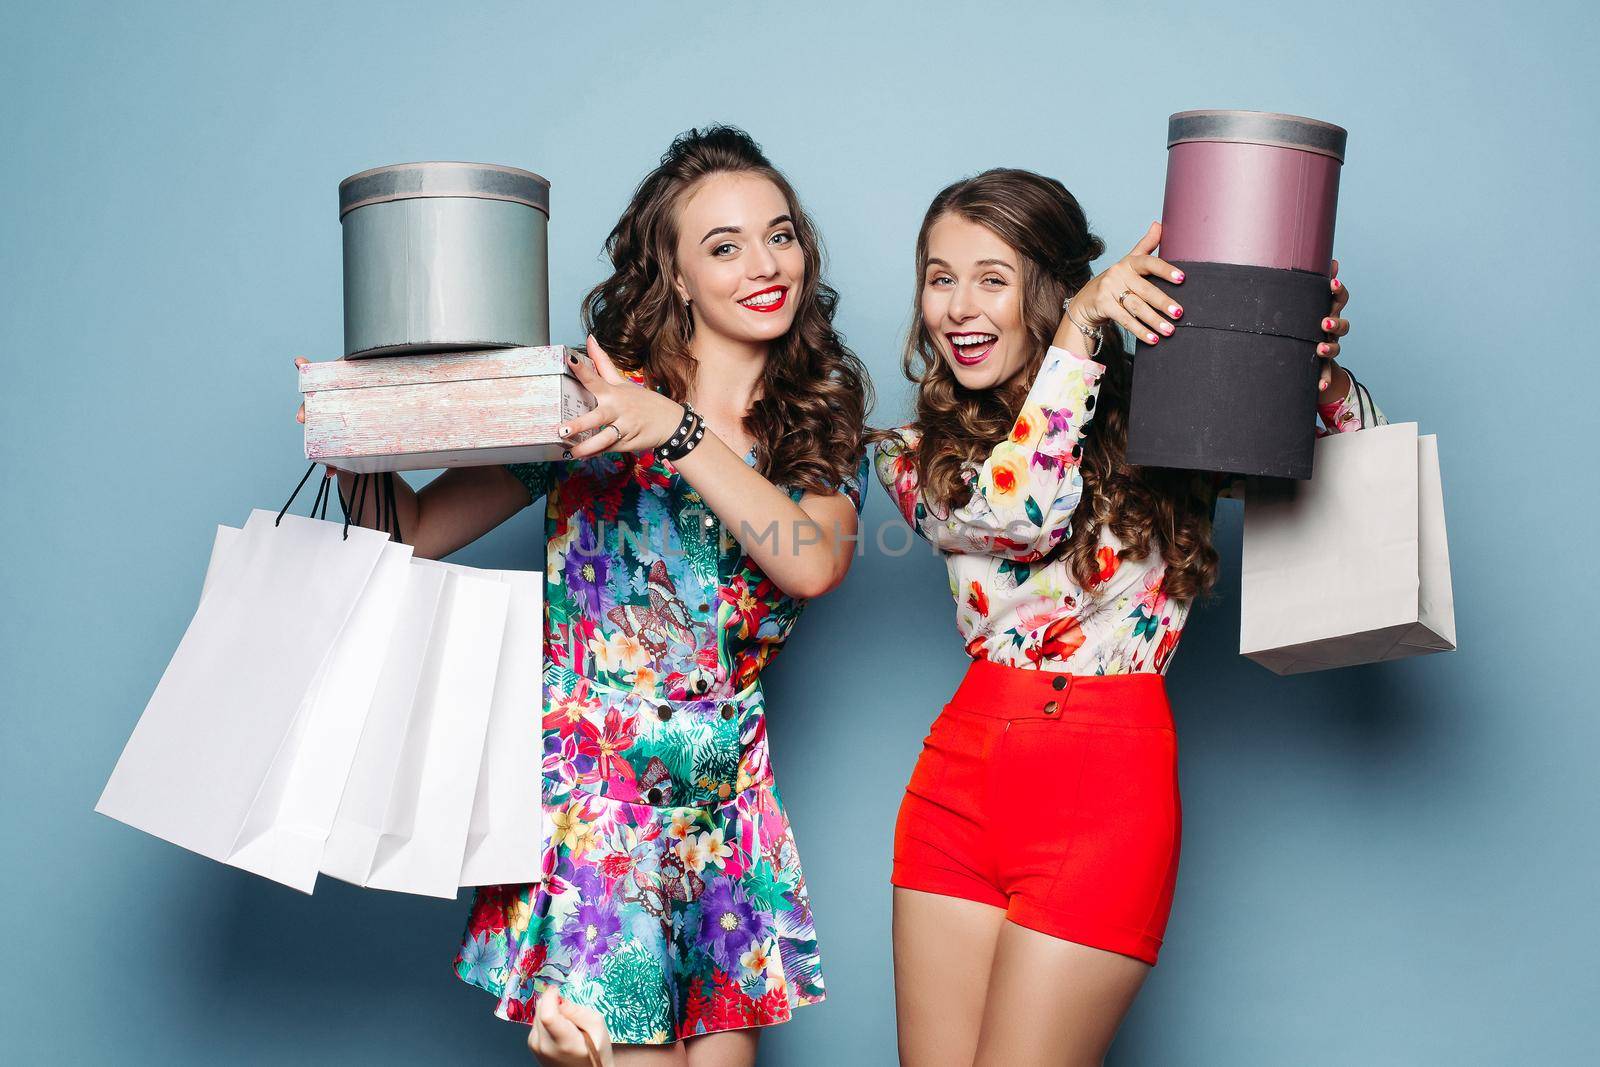 Studio portrait of happy smiling two best girlfriends in colorful fashionable clothes after shopping. Women holding hands up with many paper bags, boxes, presents. Concept of deason sale and shopping.